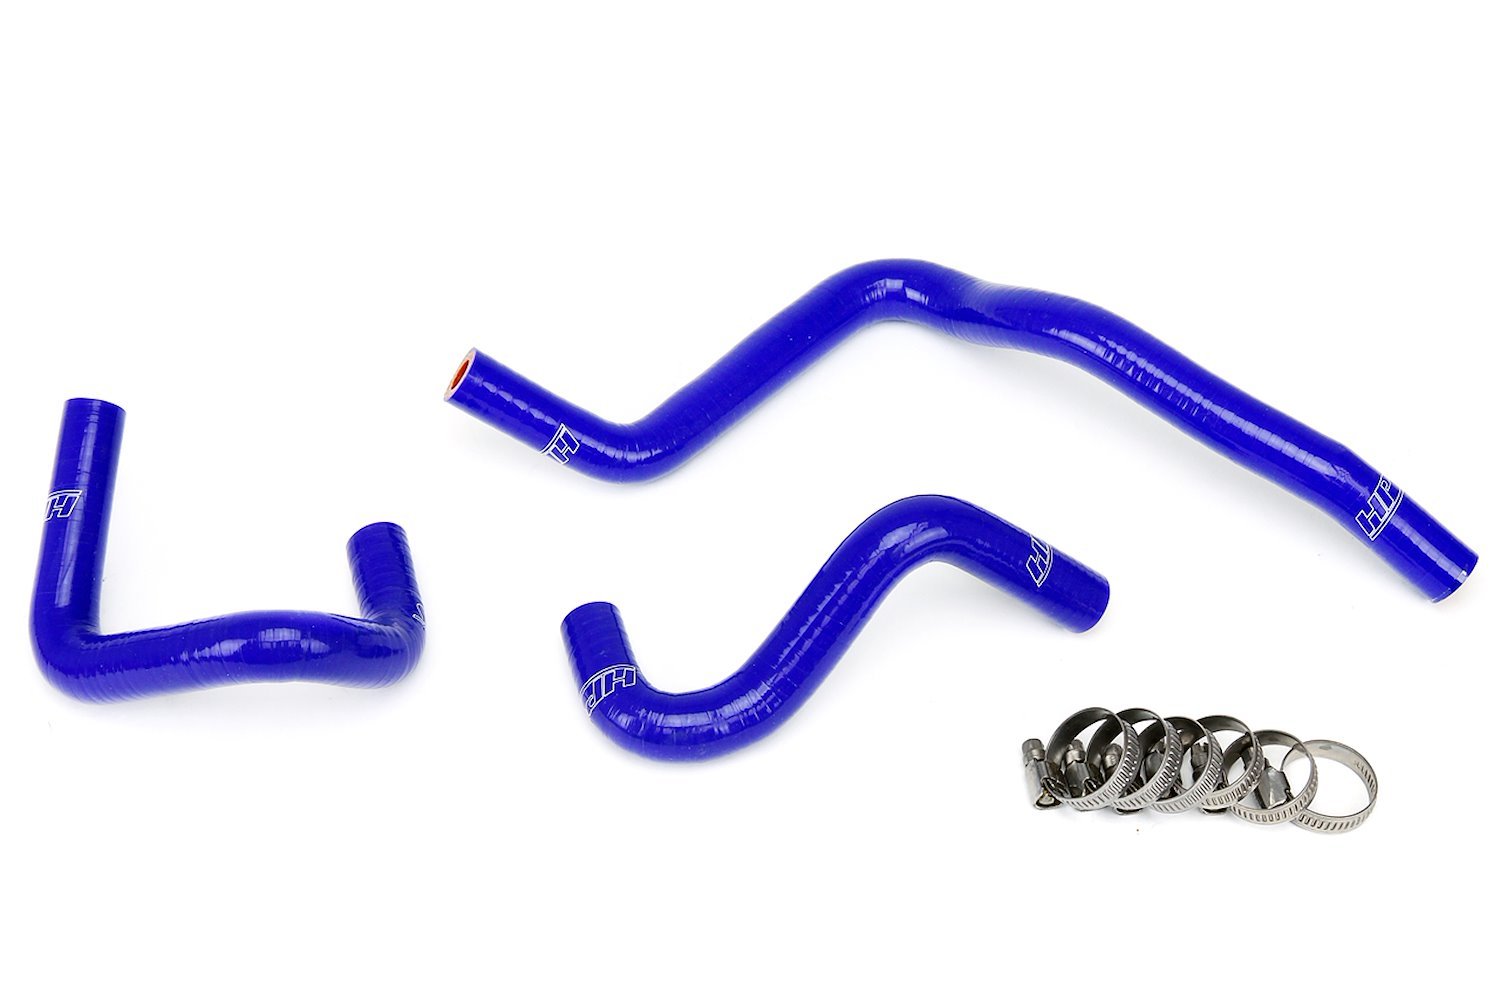 57-1748-BLUE Coolant Hose Kit, High Tem 3-Ply Reinforced Silicone, Replace OEM Rubber Ancillary Coolant Hoses